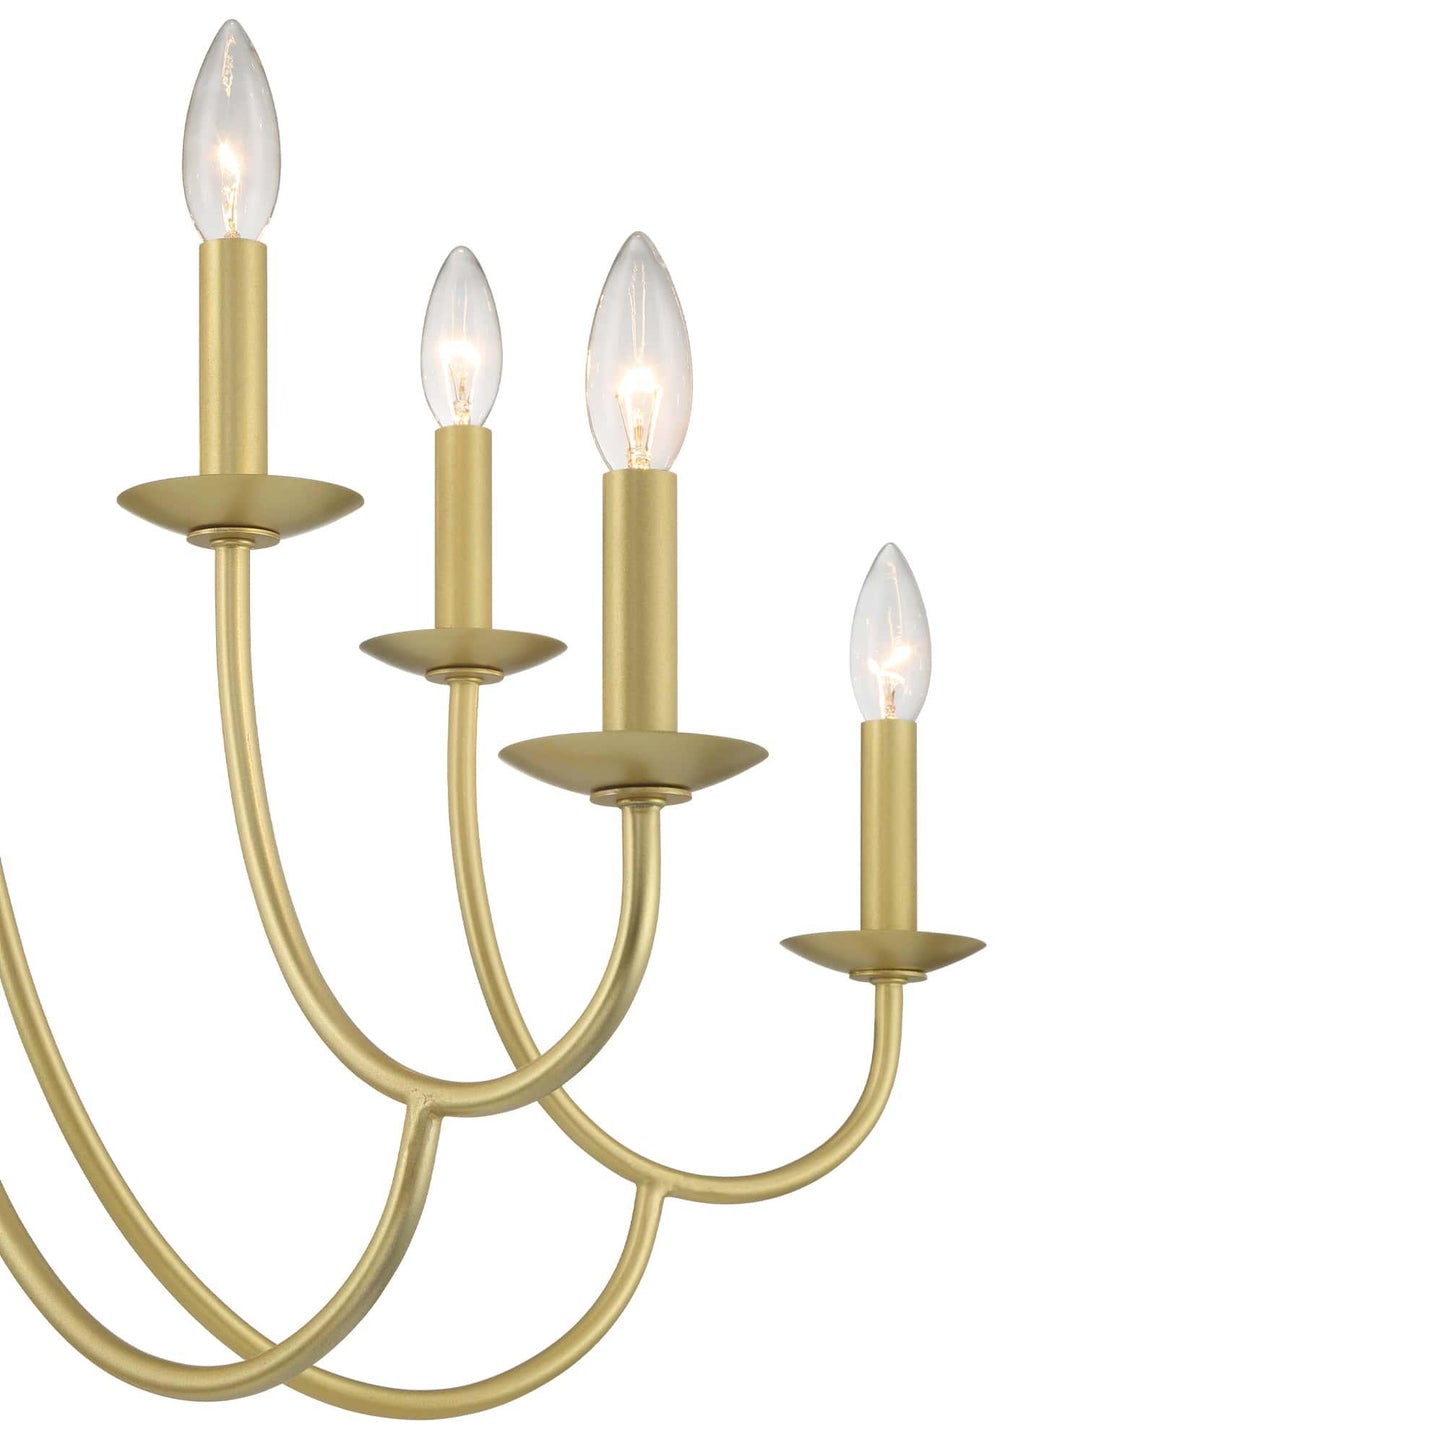 10 light candle style classic chandelier (8) by ACROMA